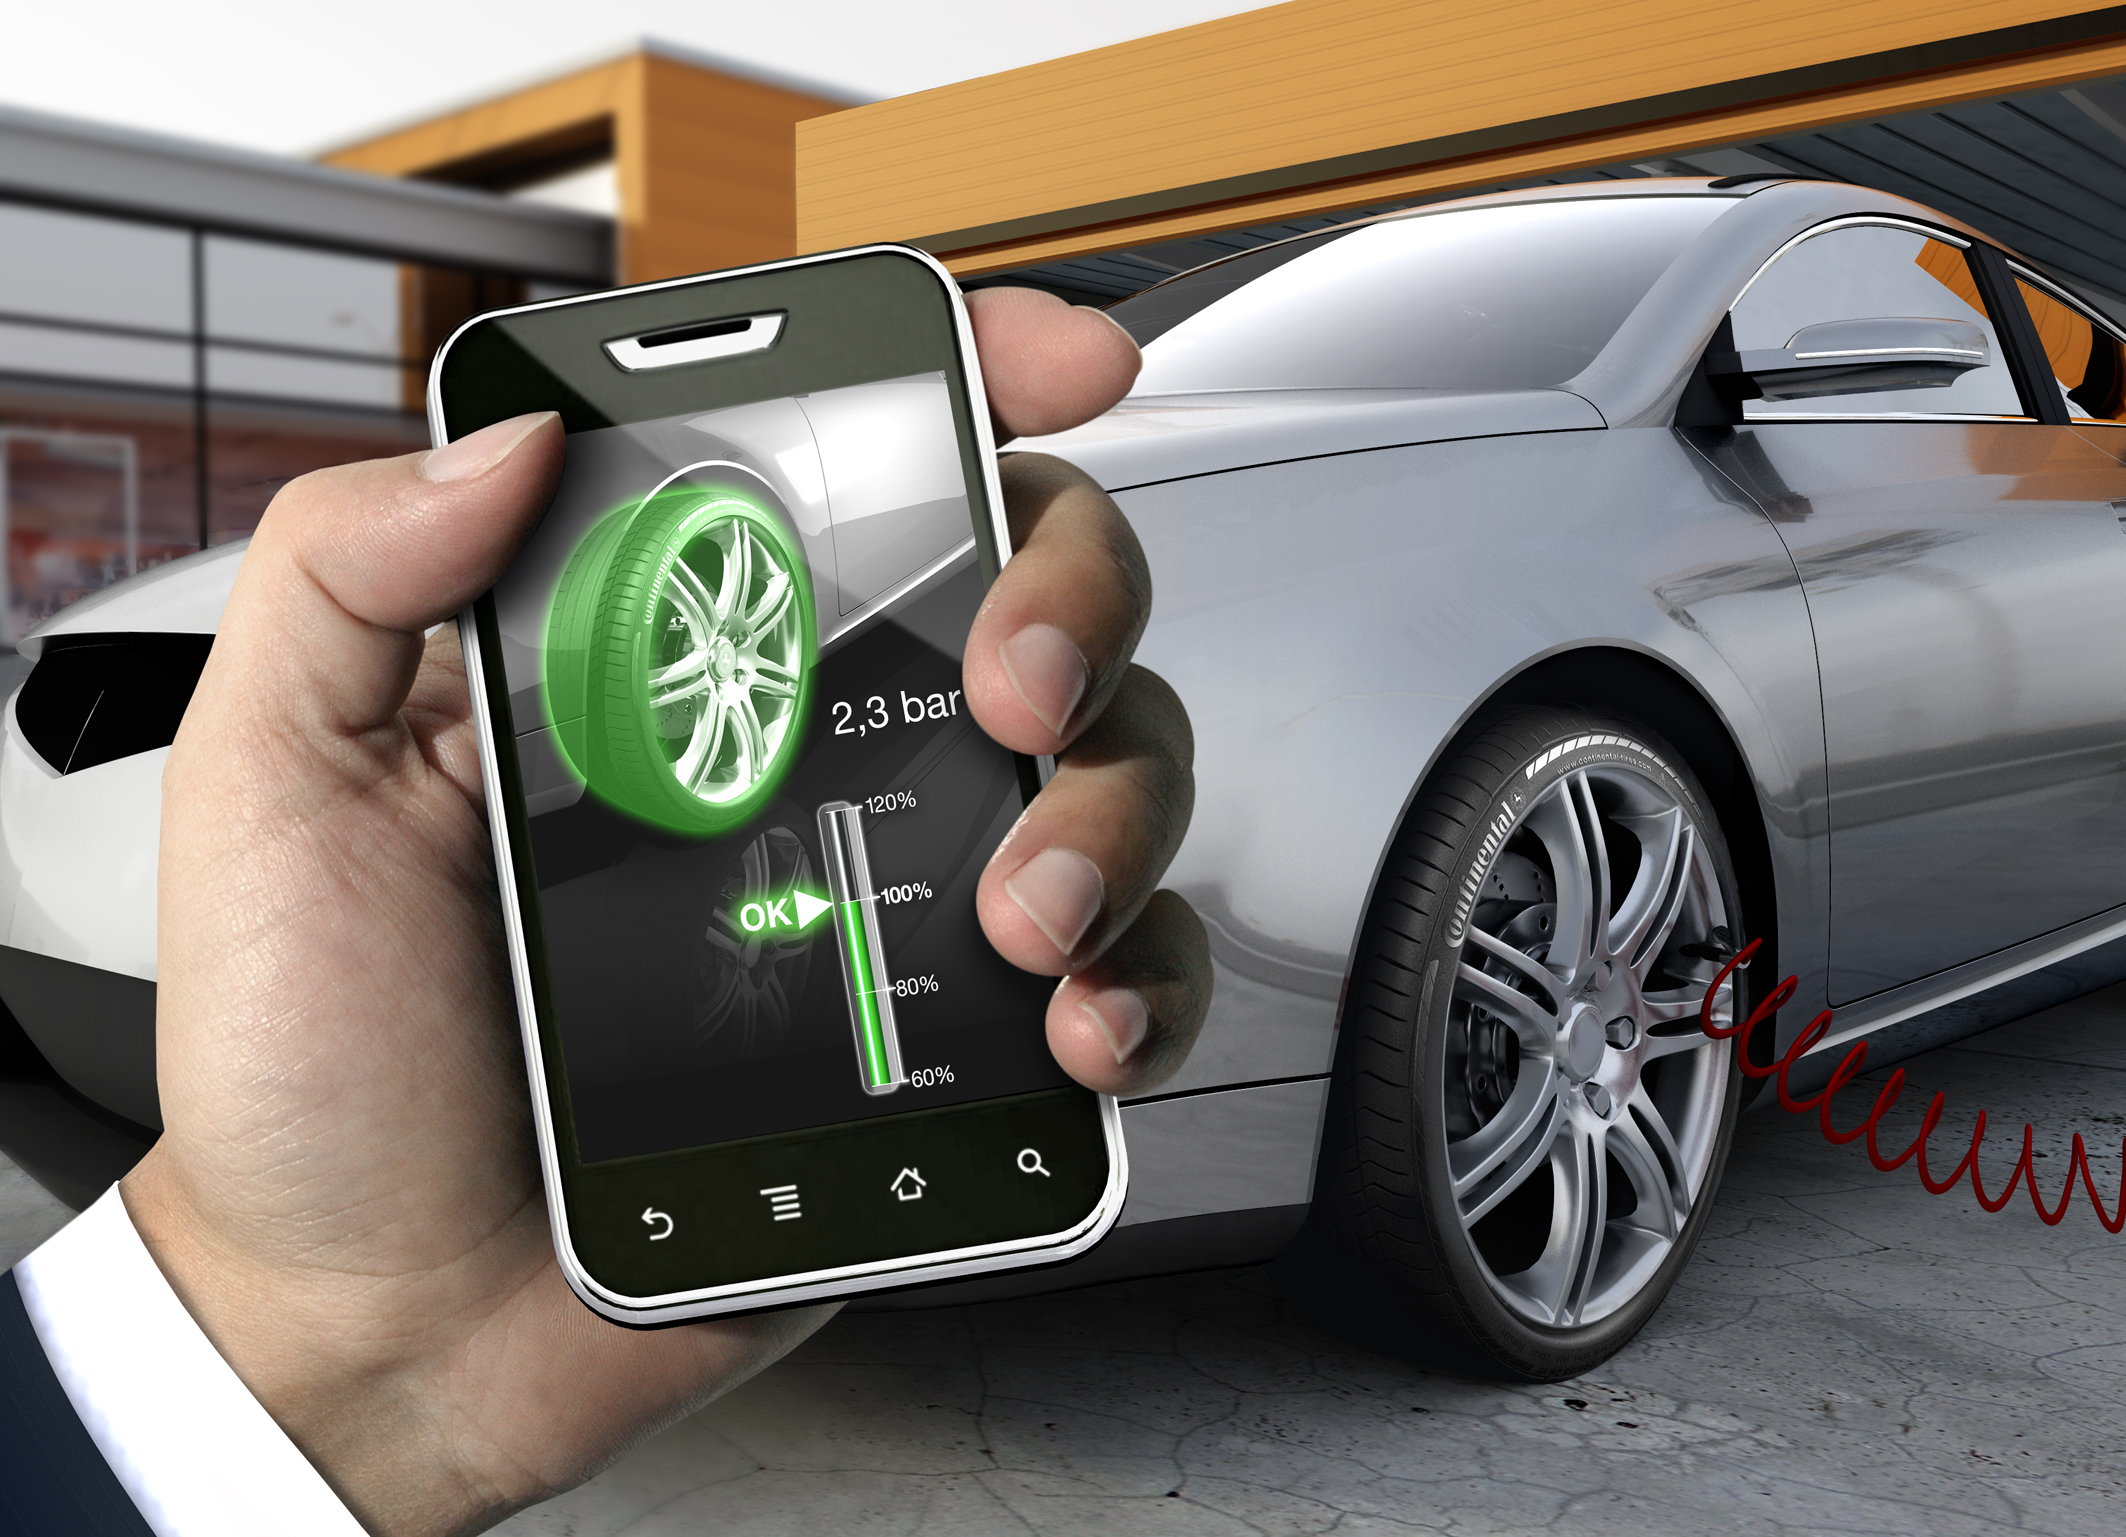 Continental’s Filling Assistant Smartphones will help drivers to inflate the tires correctly